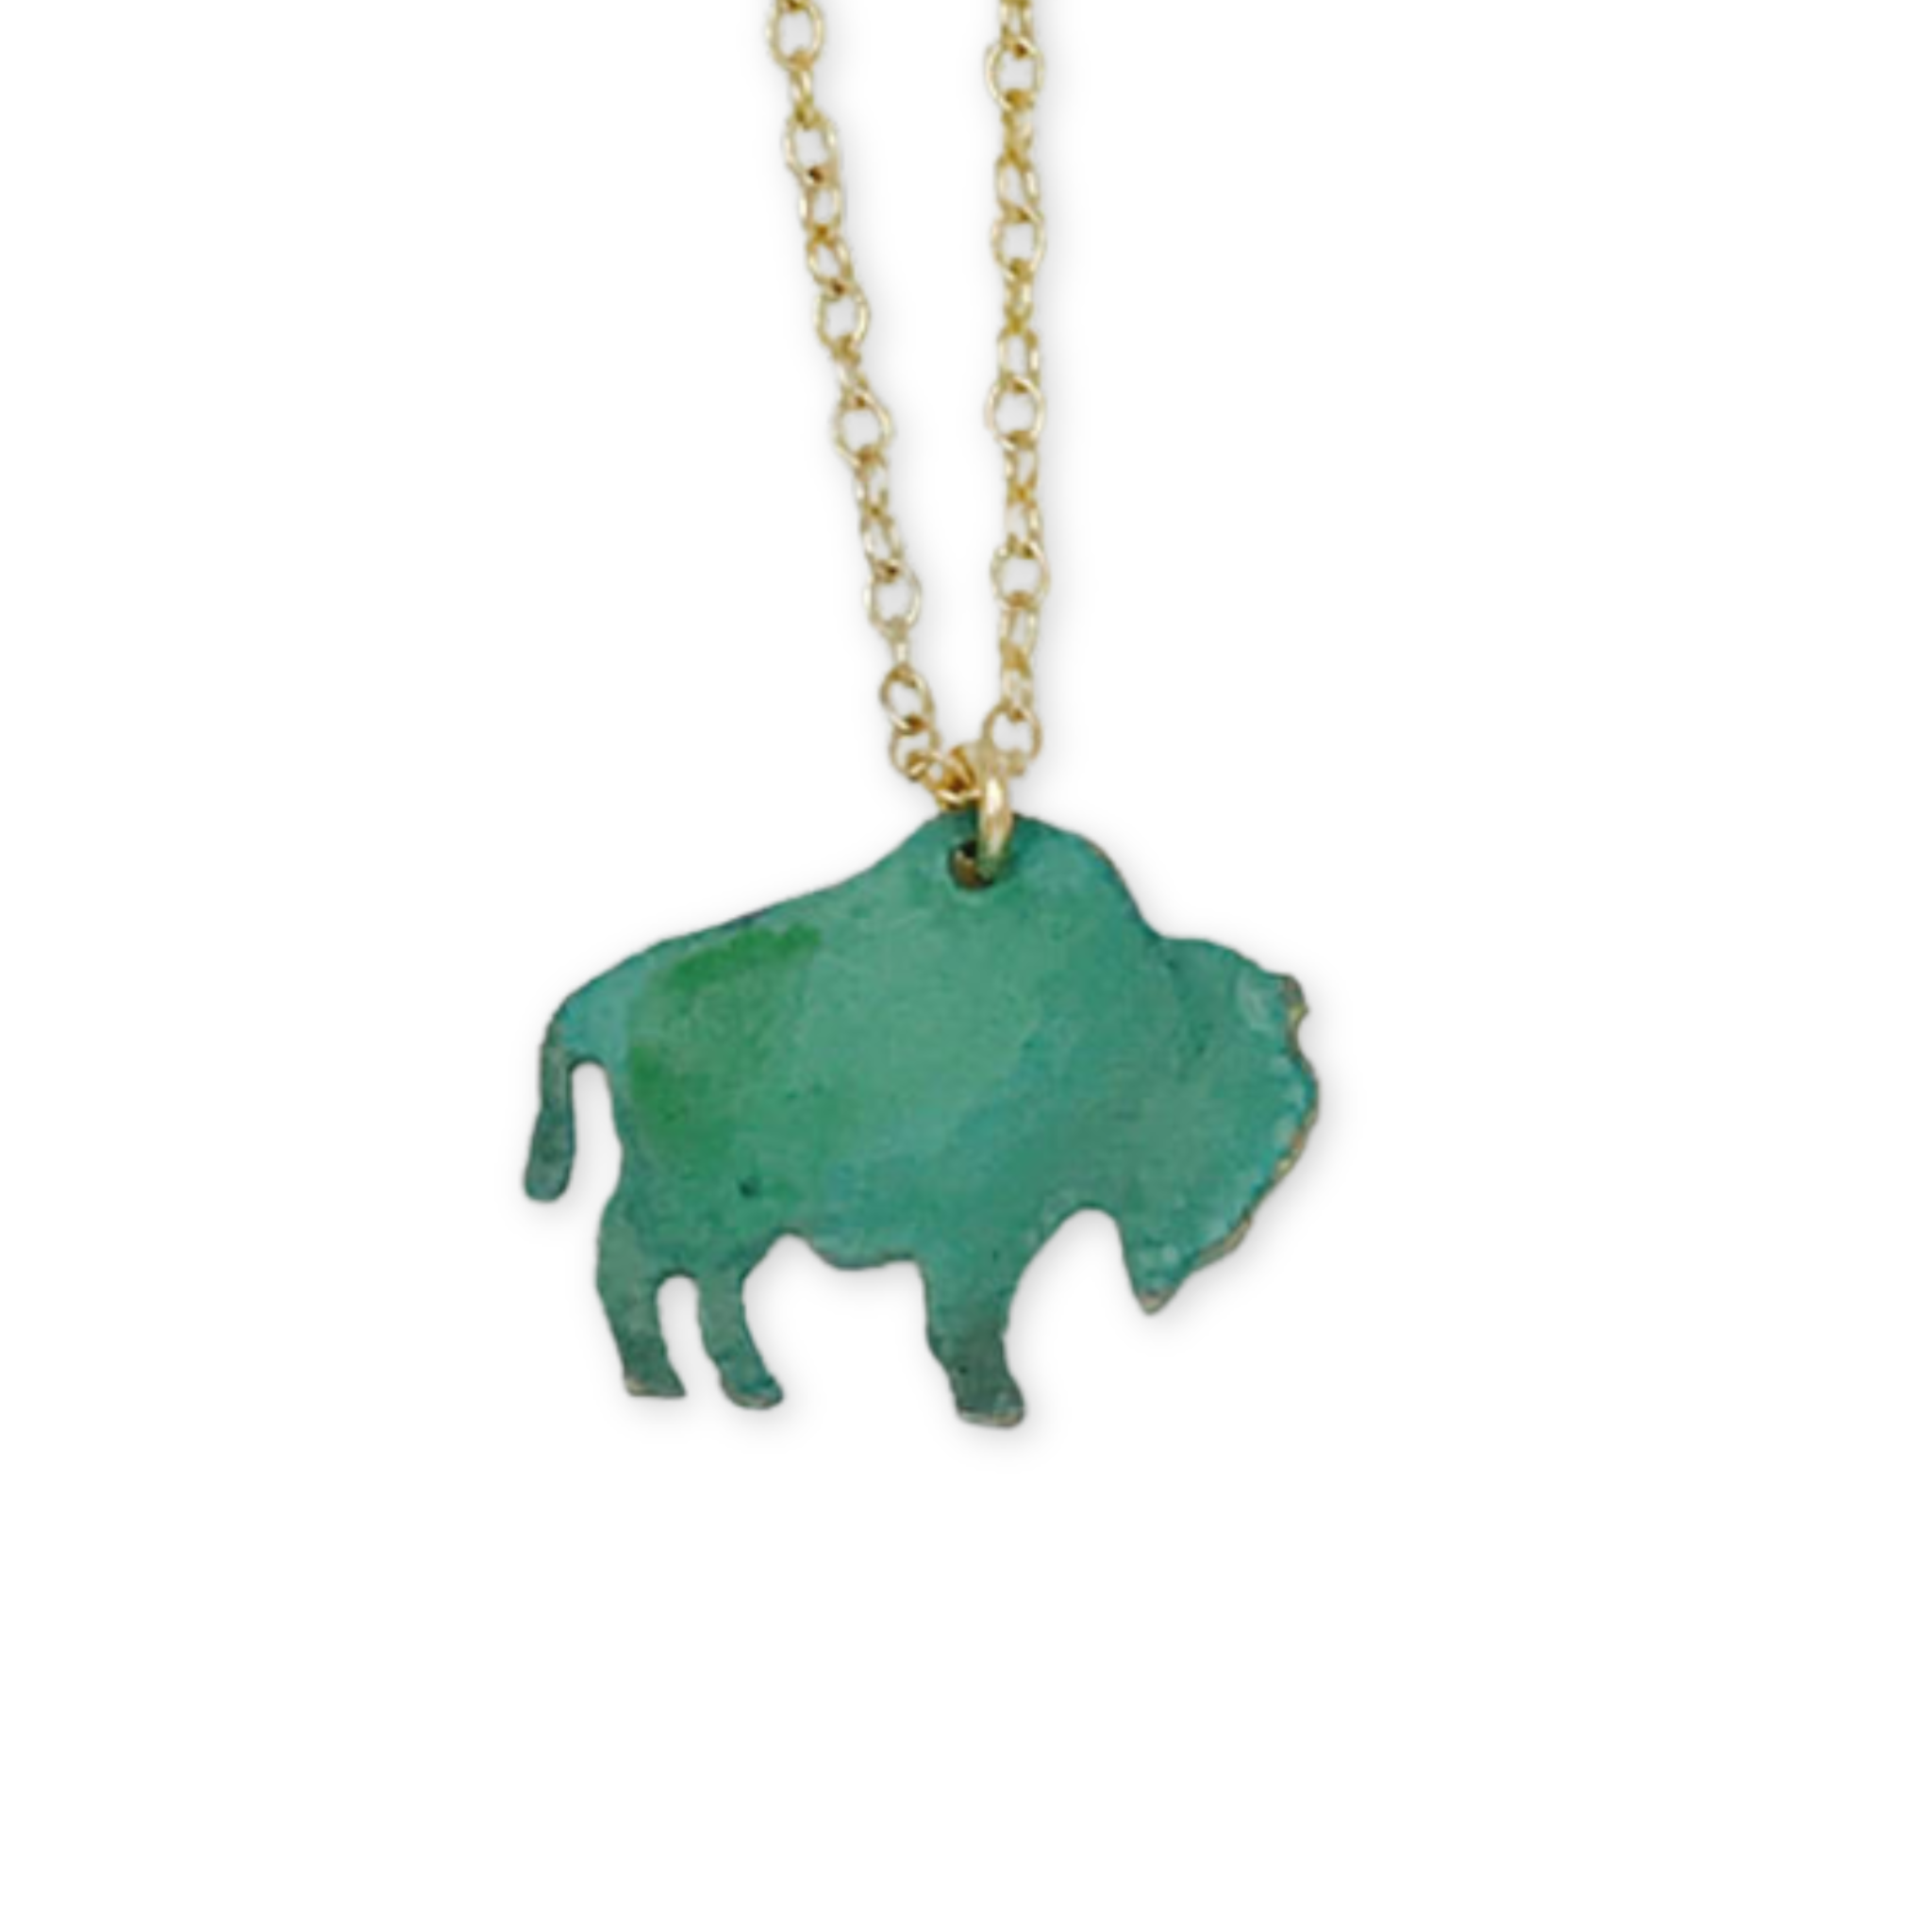 gold necklace with a patina bison charm